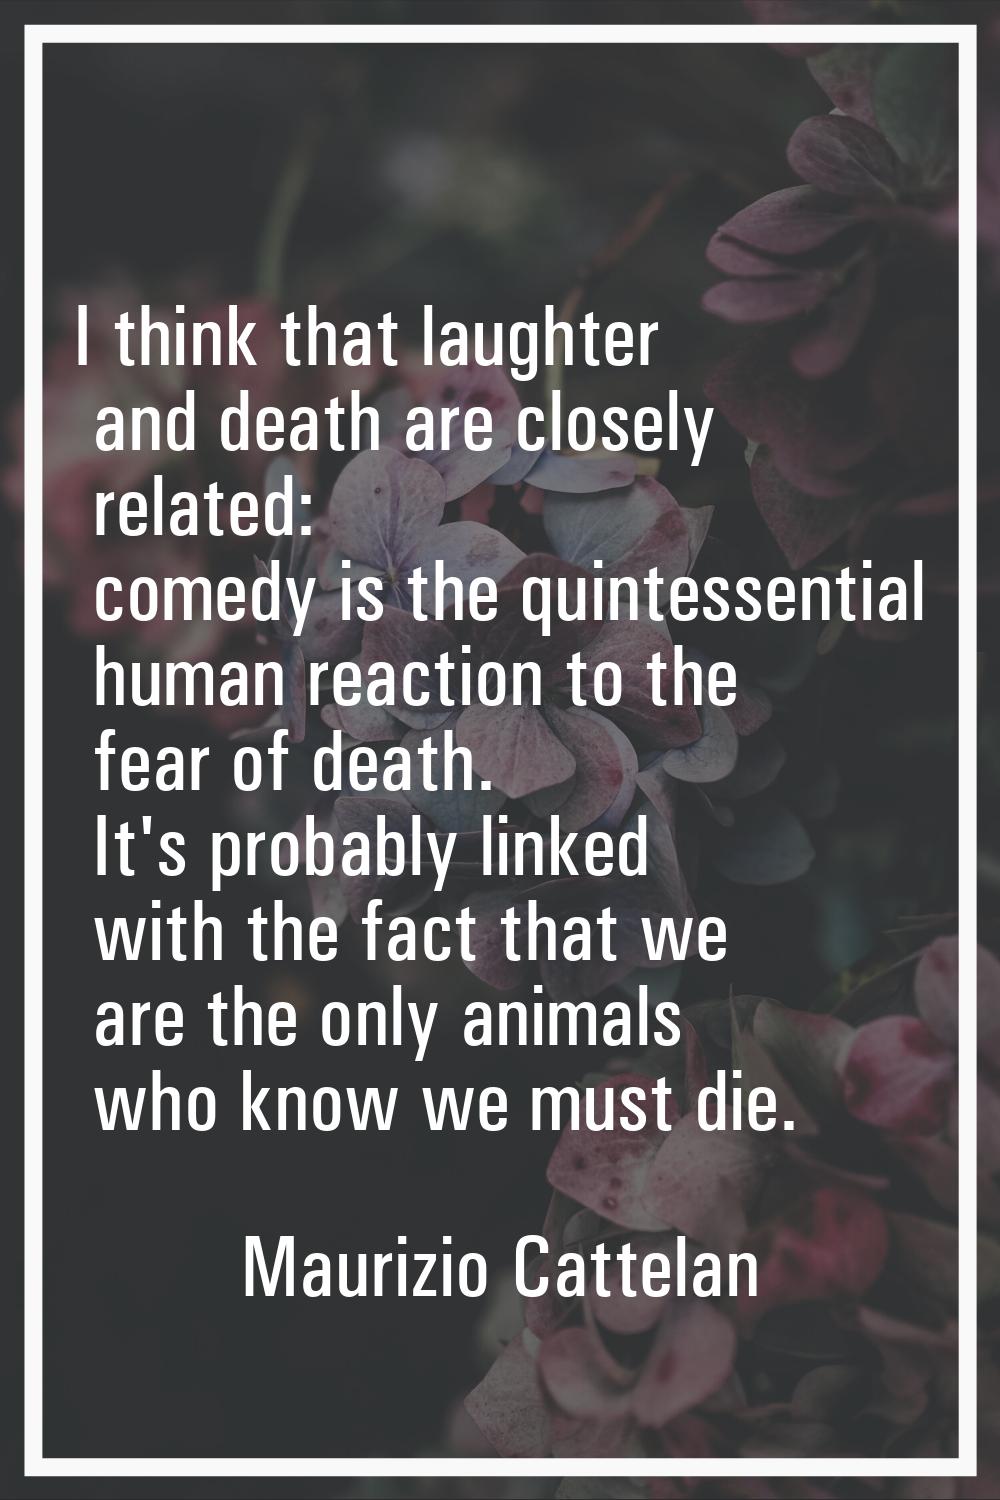 I think that laughter and death are closely related: comedy is the quintessential human reaction to